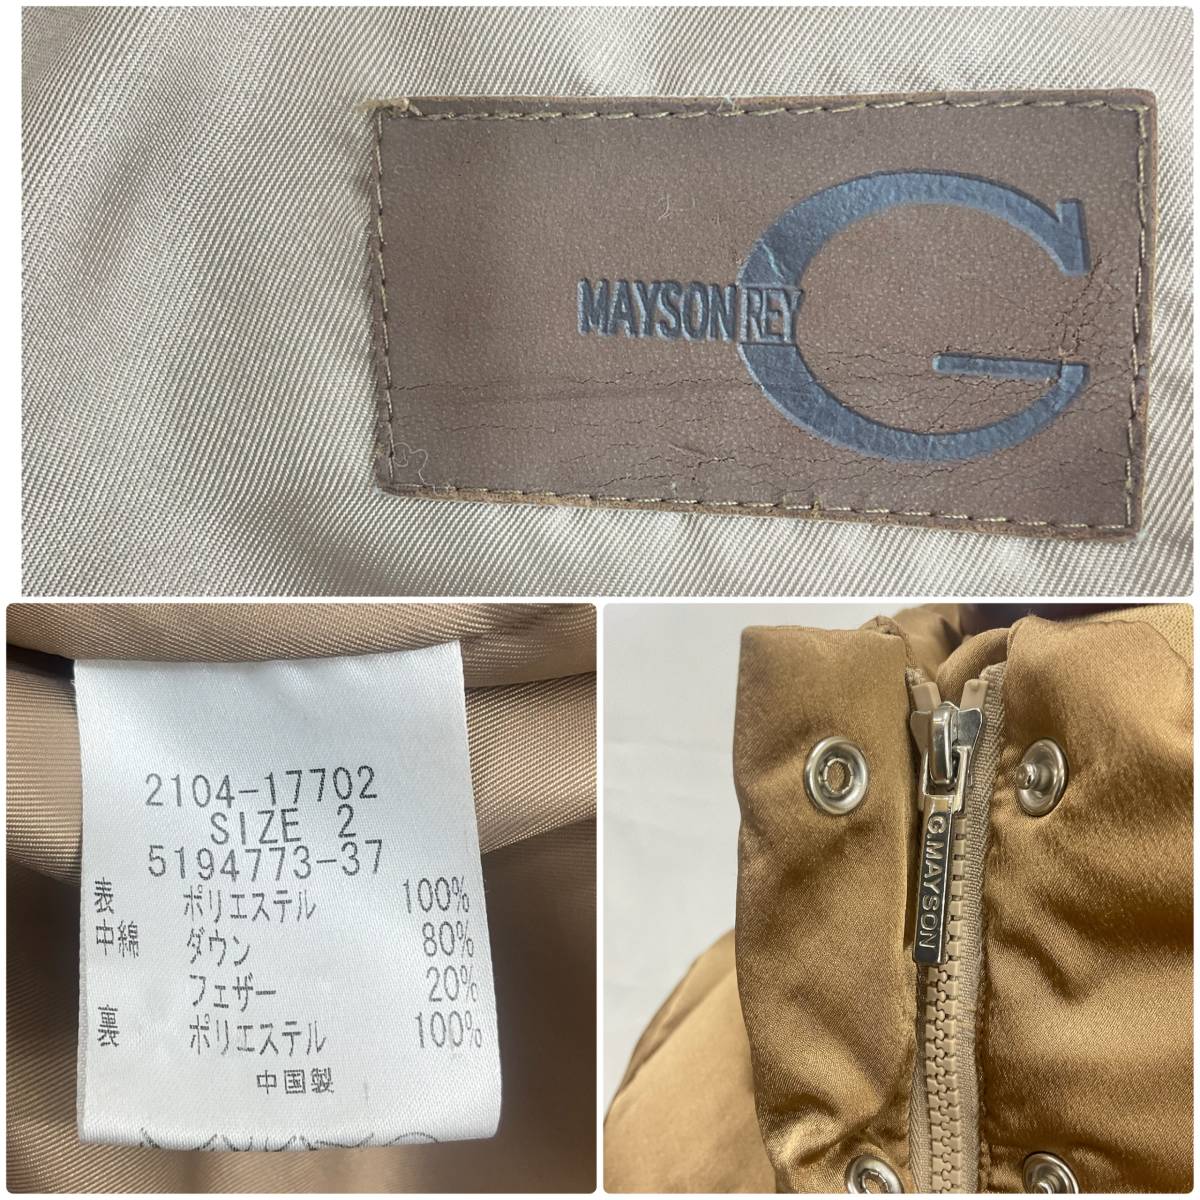 MAYSON GREY Mayson Grey quilting down coat size2 M size jacket long coat Camel lady's outer (C879)